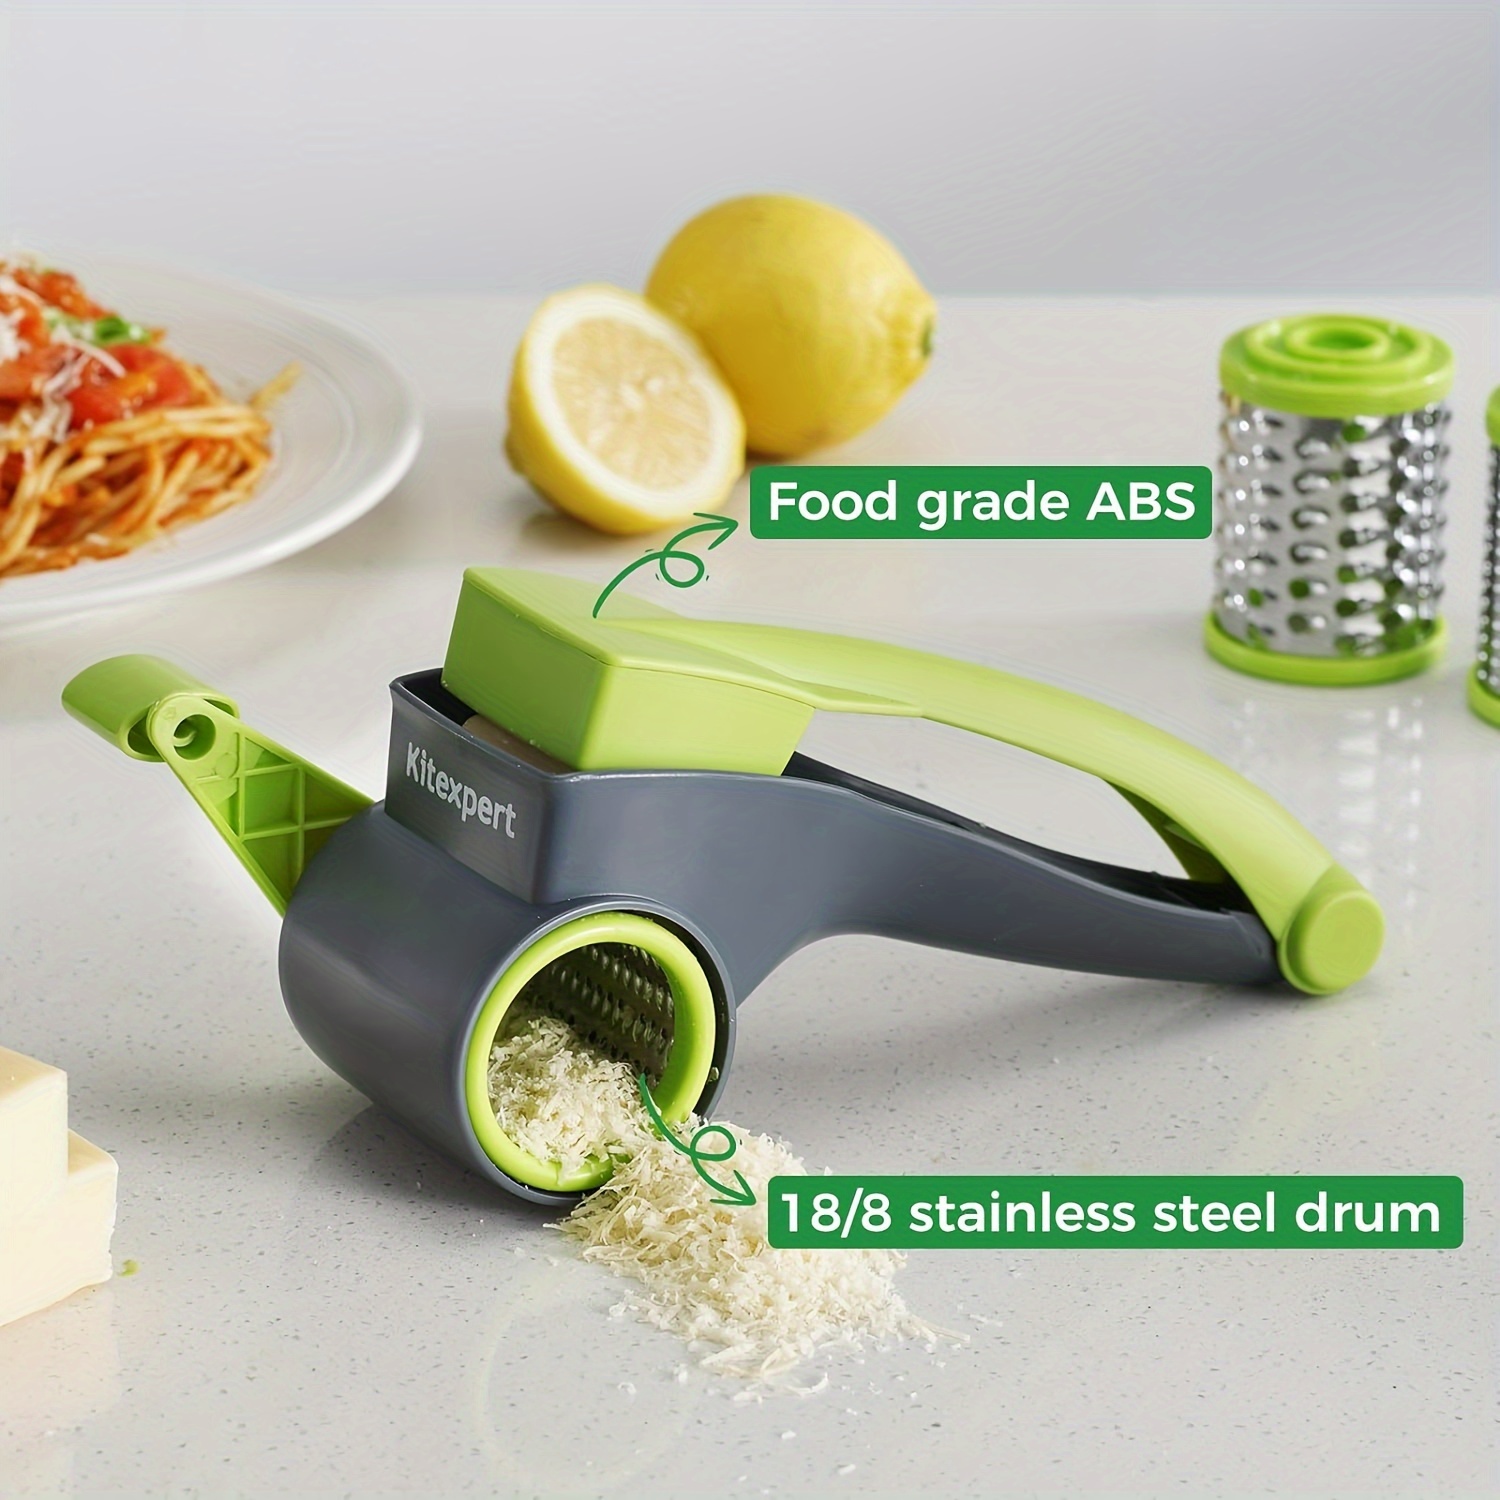 How To Buy Olive Garden's Cheese Grater At The Restaurant